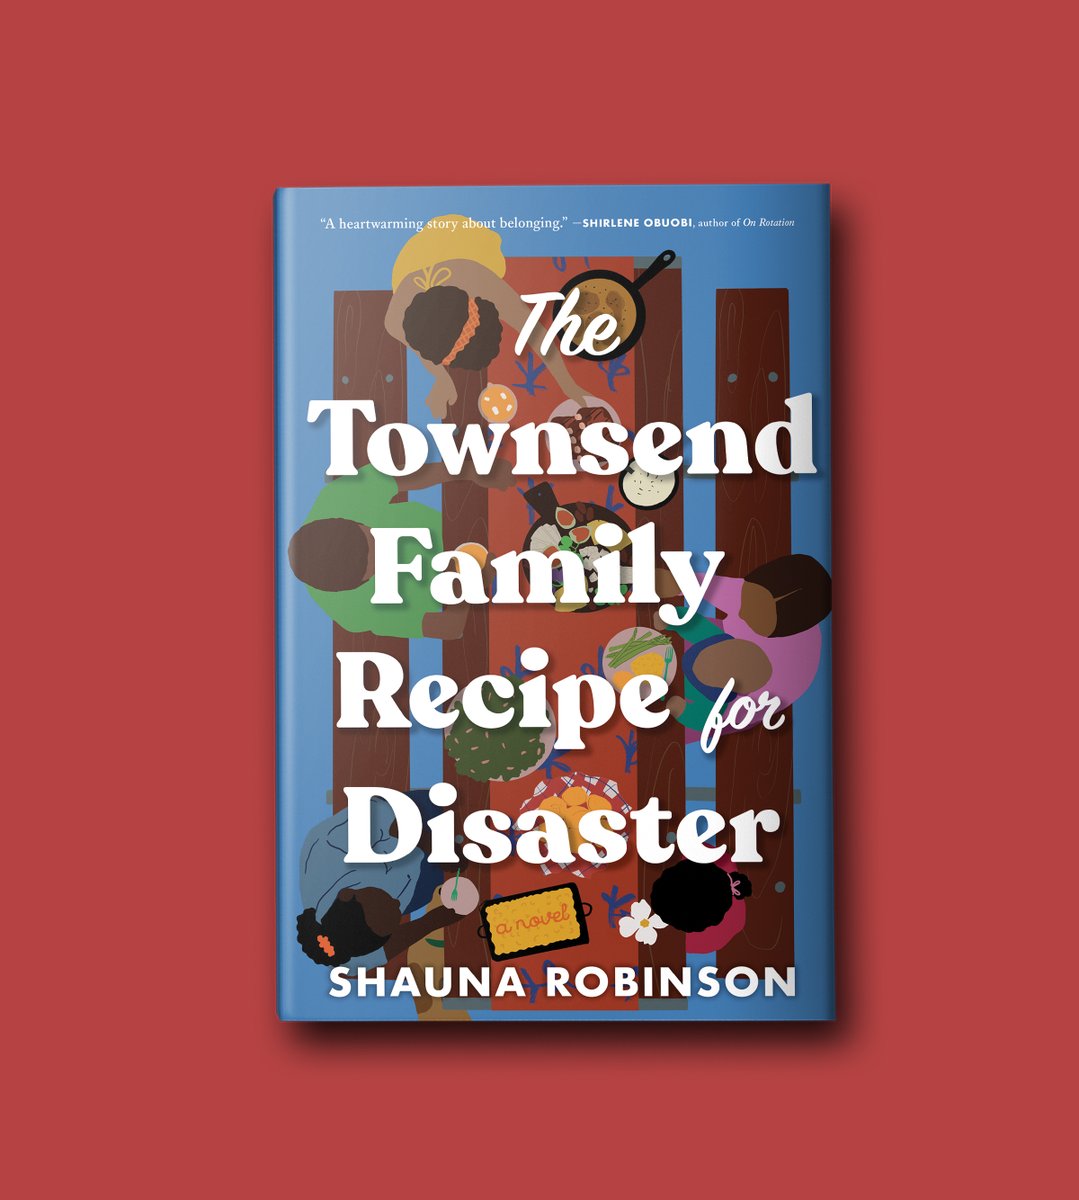 A fiction book where you want to be best friends with the main character PLUS DELICIOUS FOOD?? Sign yourself up for THE TOWNSEND FAMILY RECIPE FOR DISASTER 😋 #ewgc